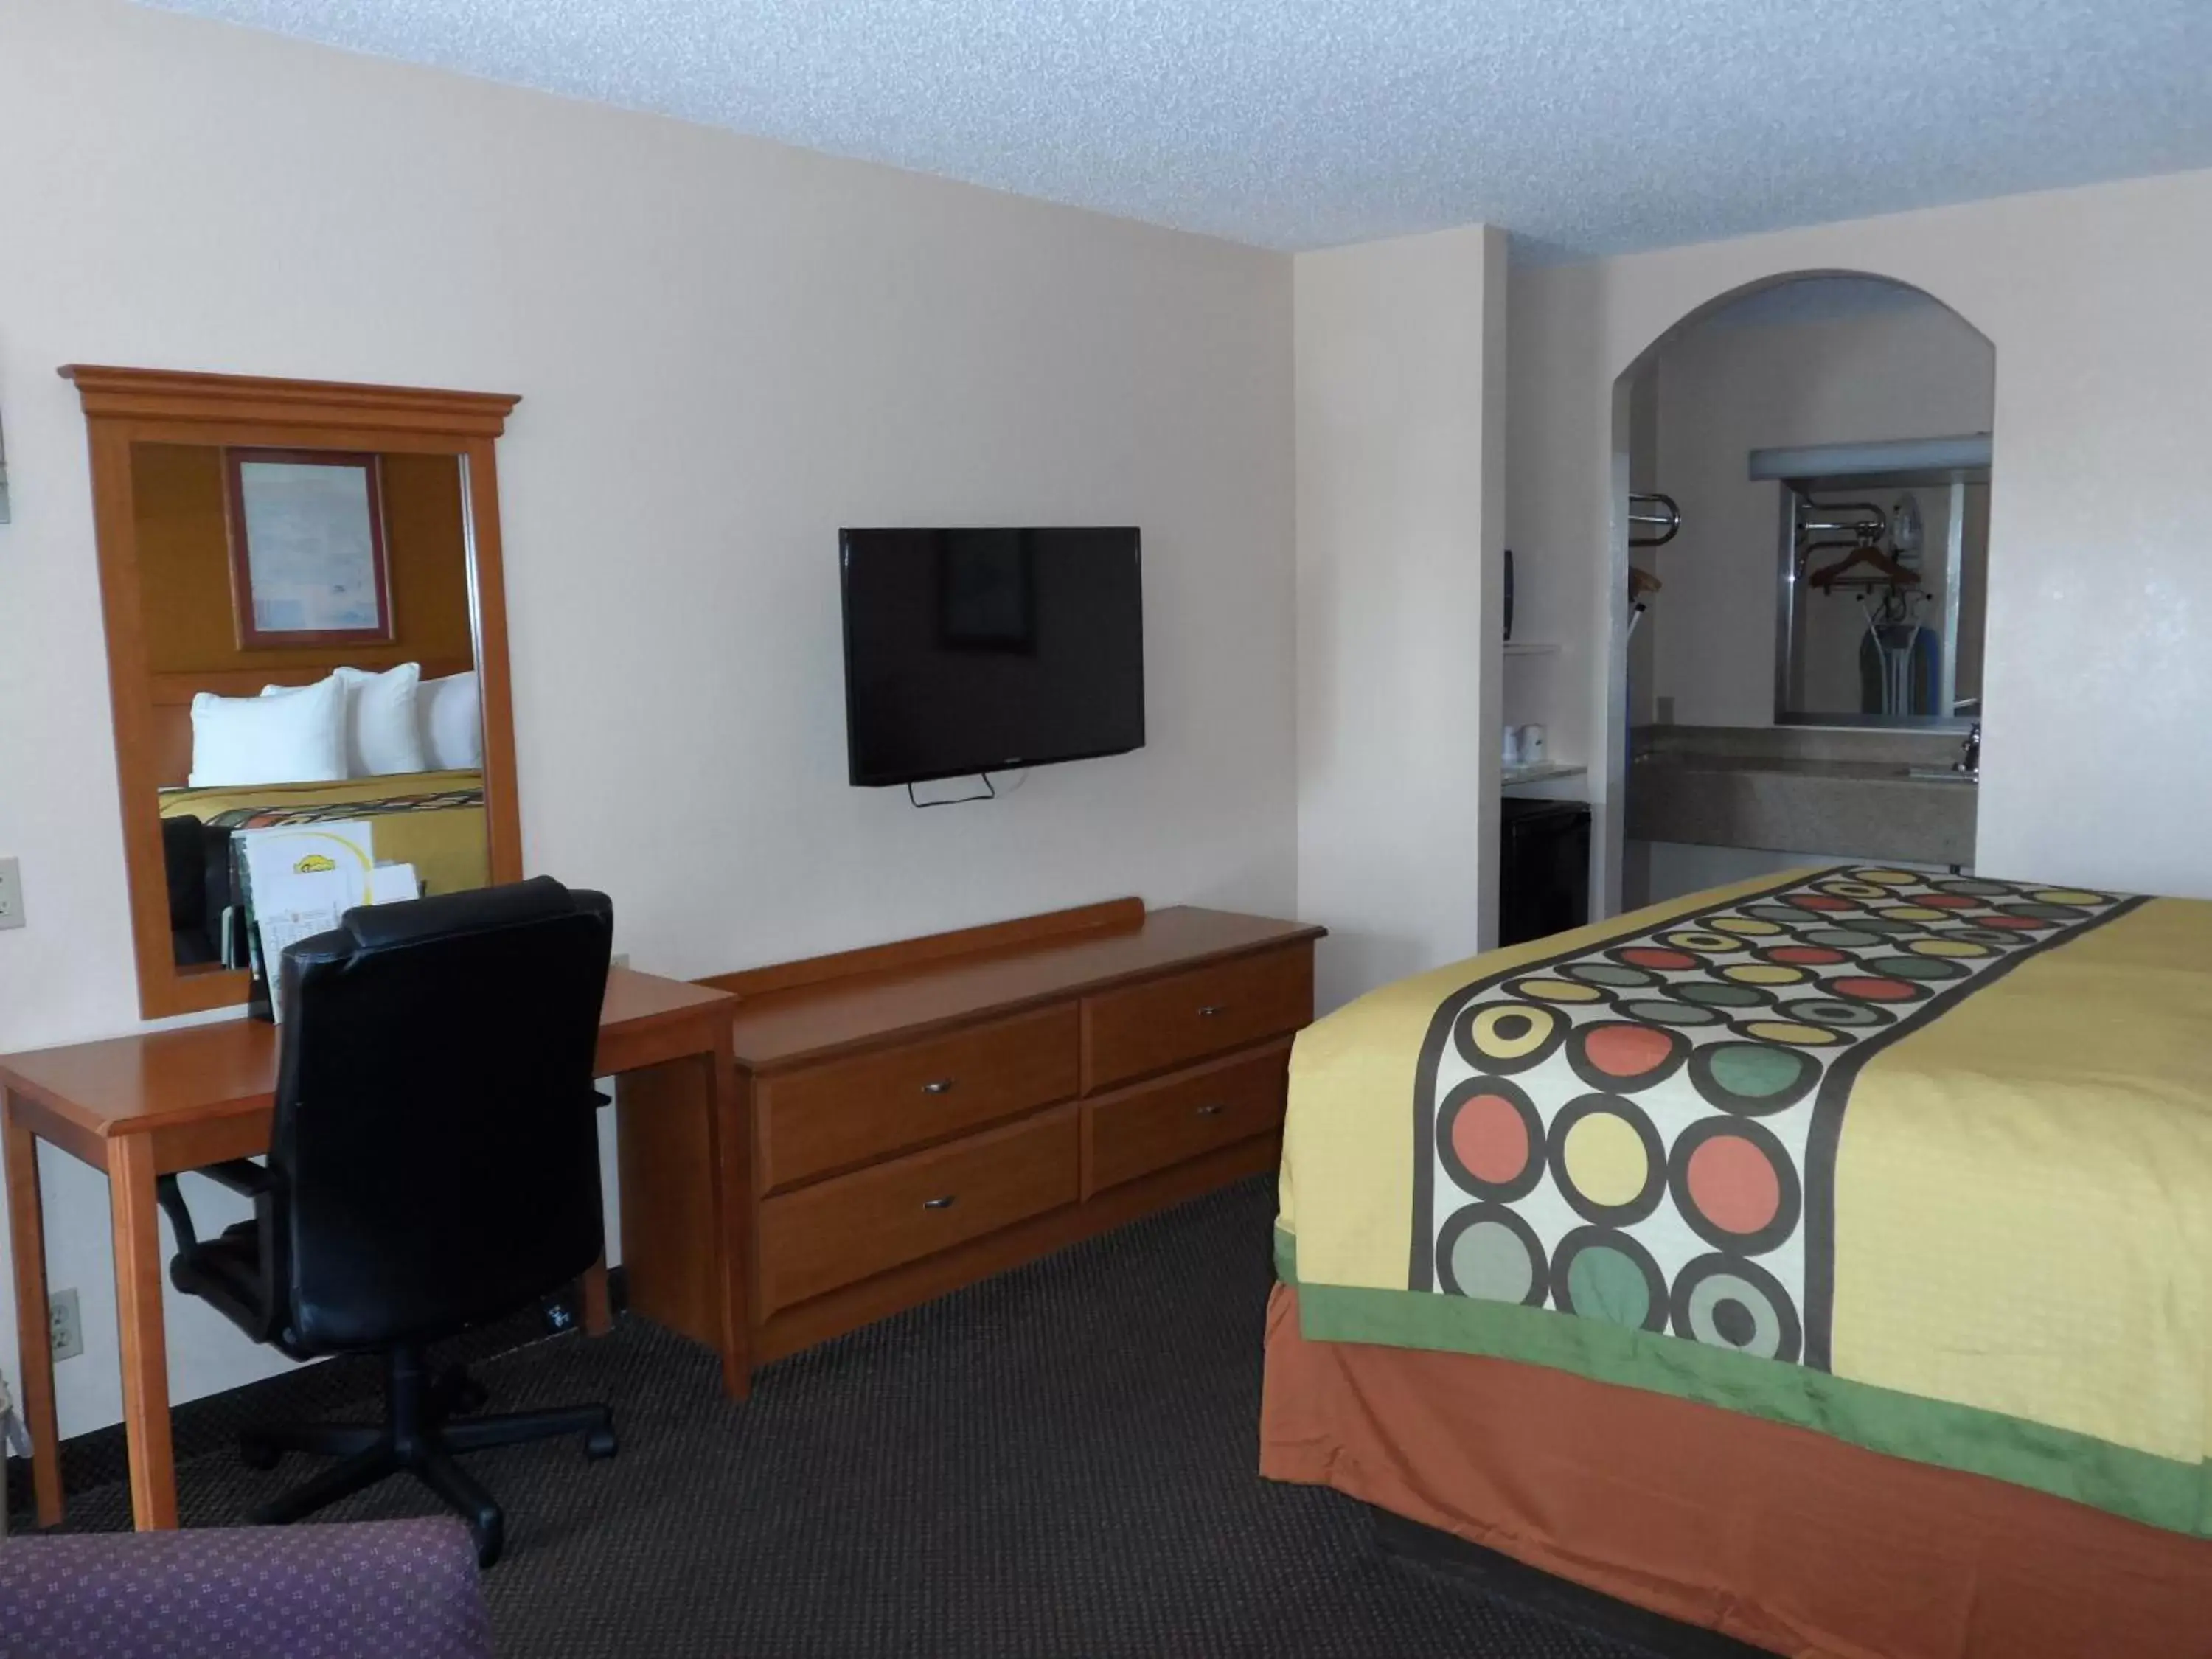 King Studio Suite - Non-Smoking in Super 8 by Wyndham Waco/Mall area TX